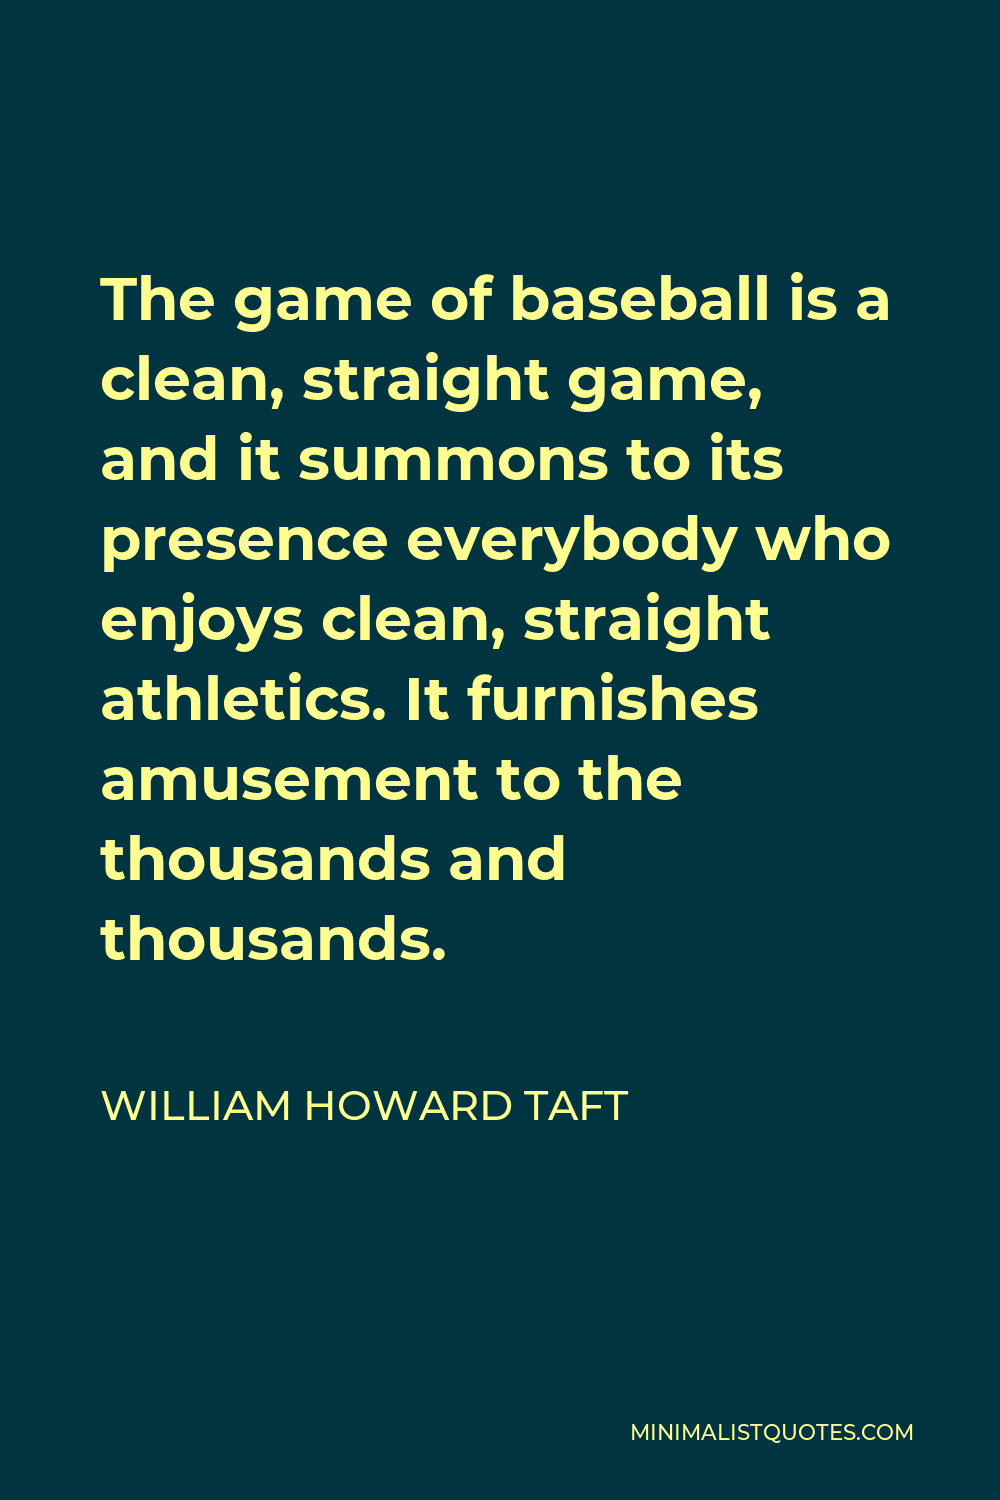 William Howard Taft Quote - The game of baseball is a clean, straight game.